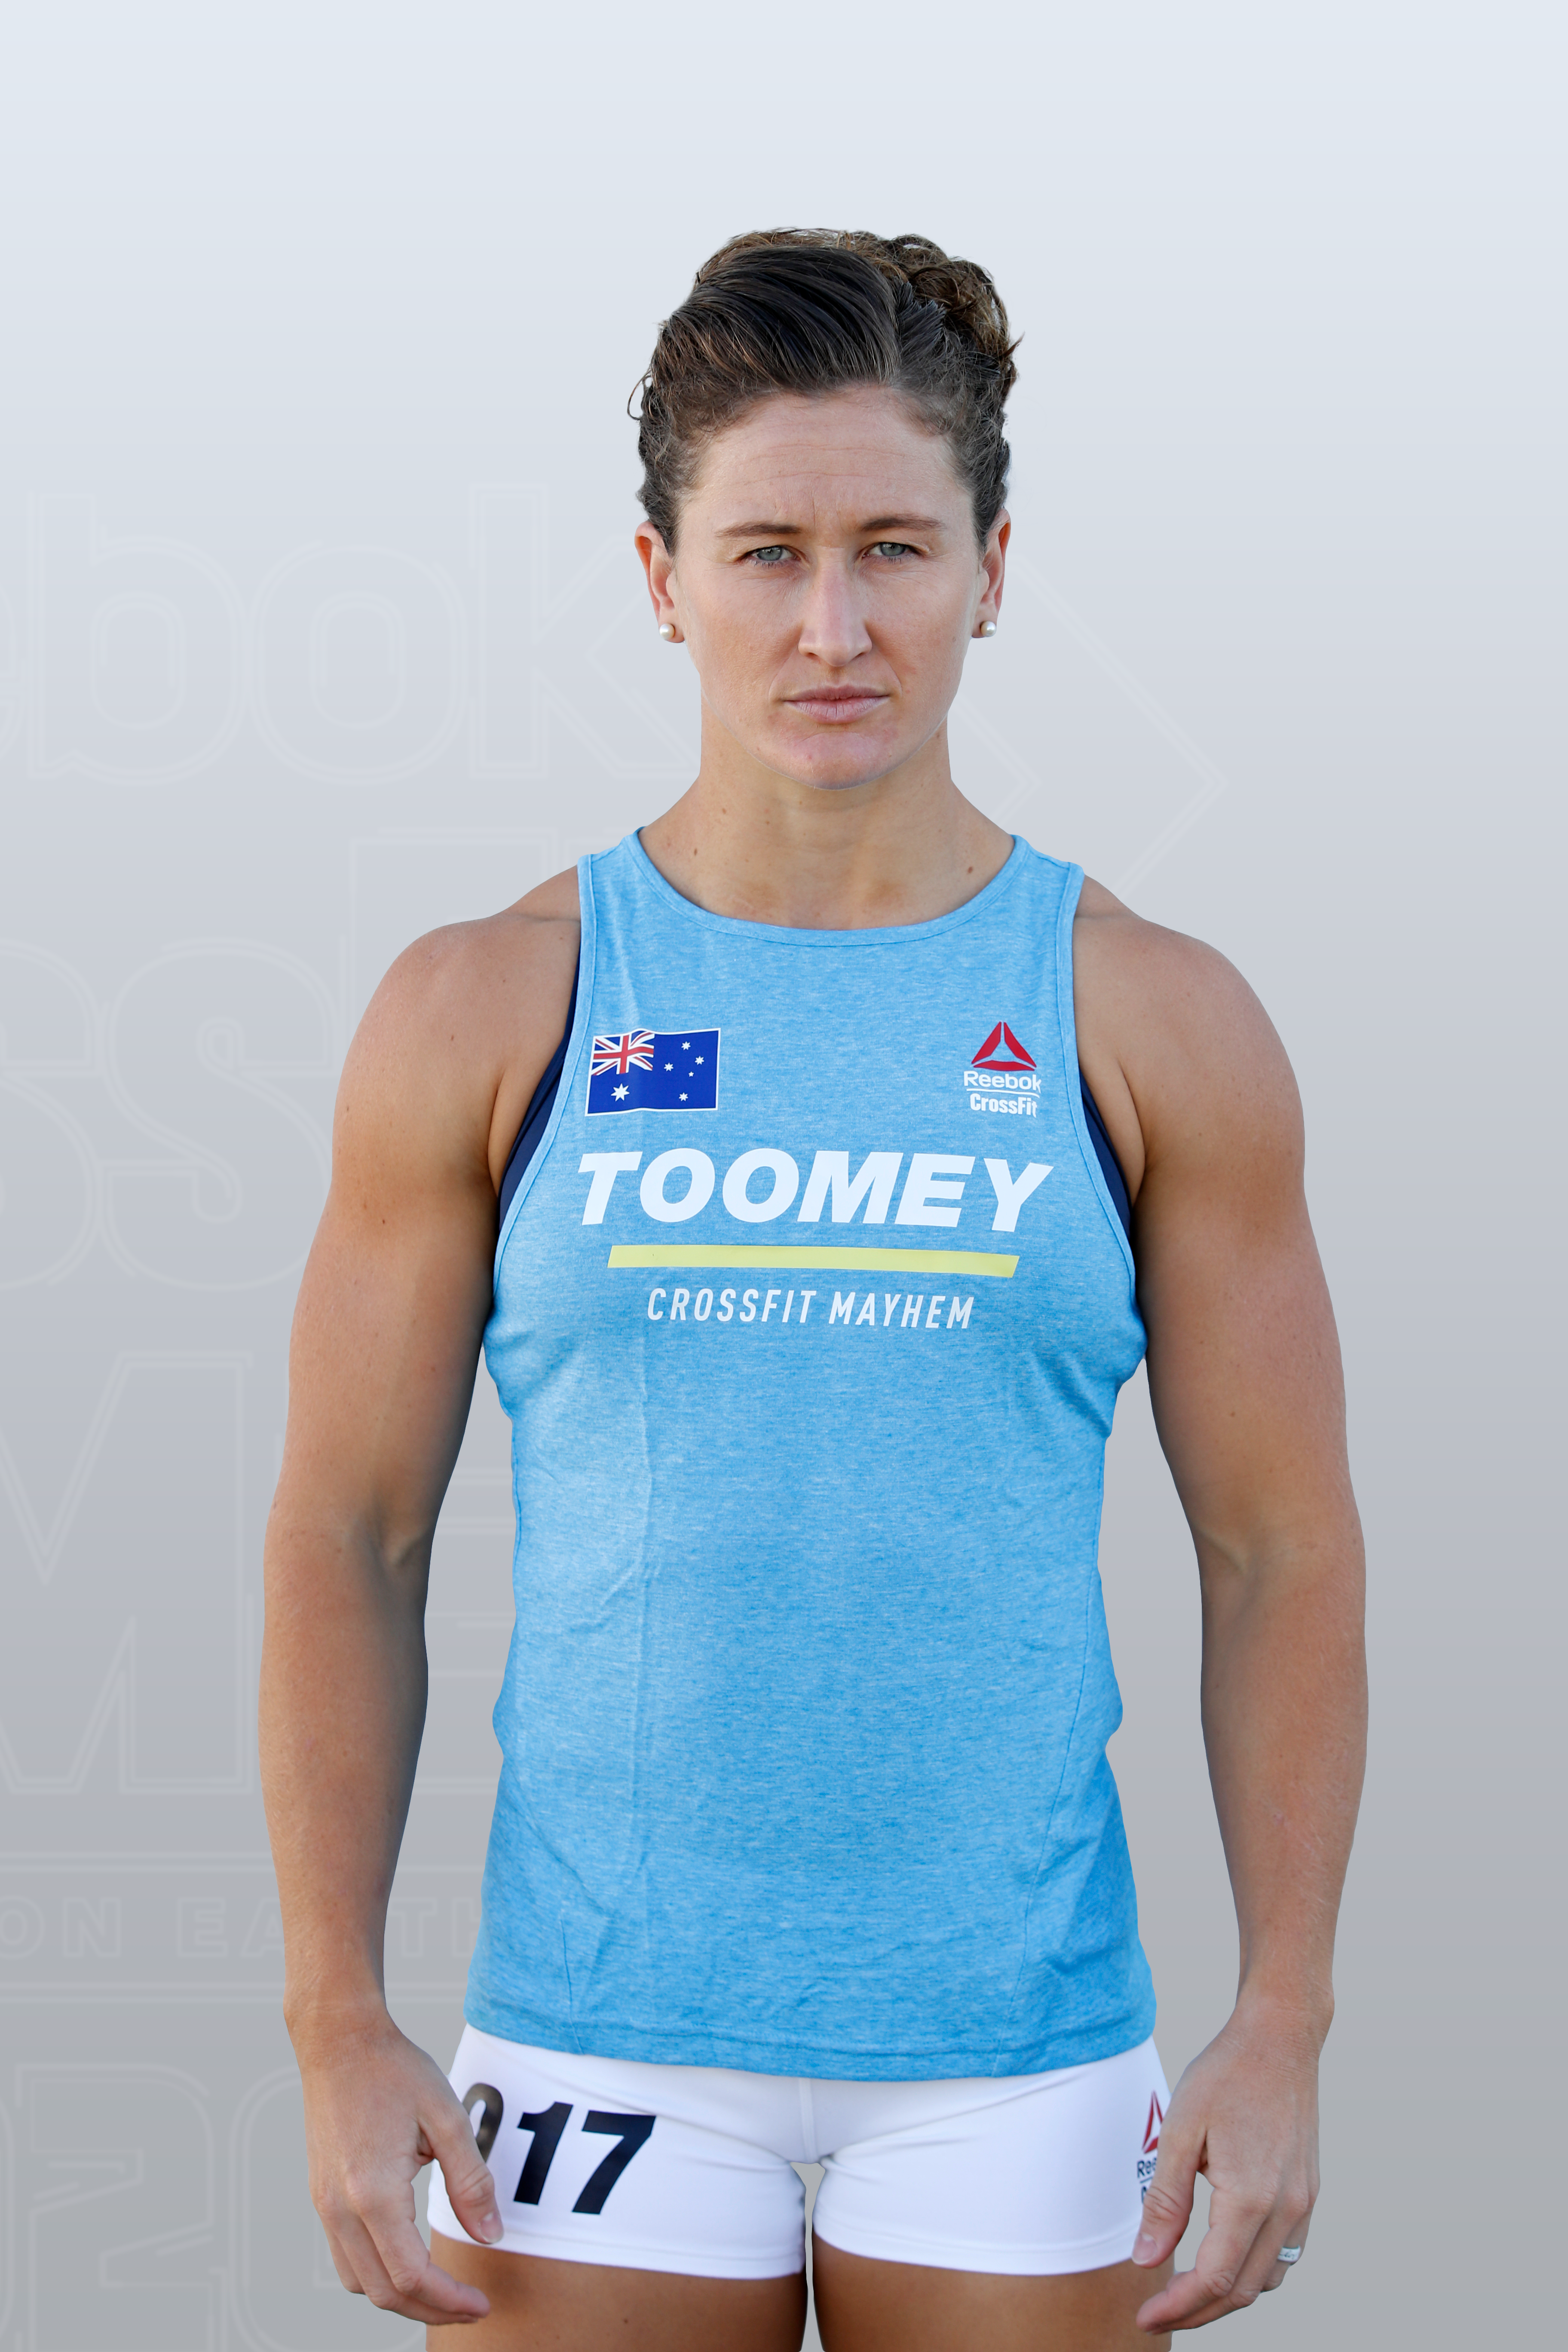 Tia-Clair Toomey dominated day one of the 2020 CrossFit Games. Photo: CrossFit Games